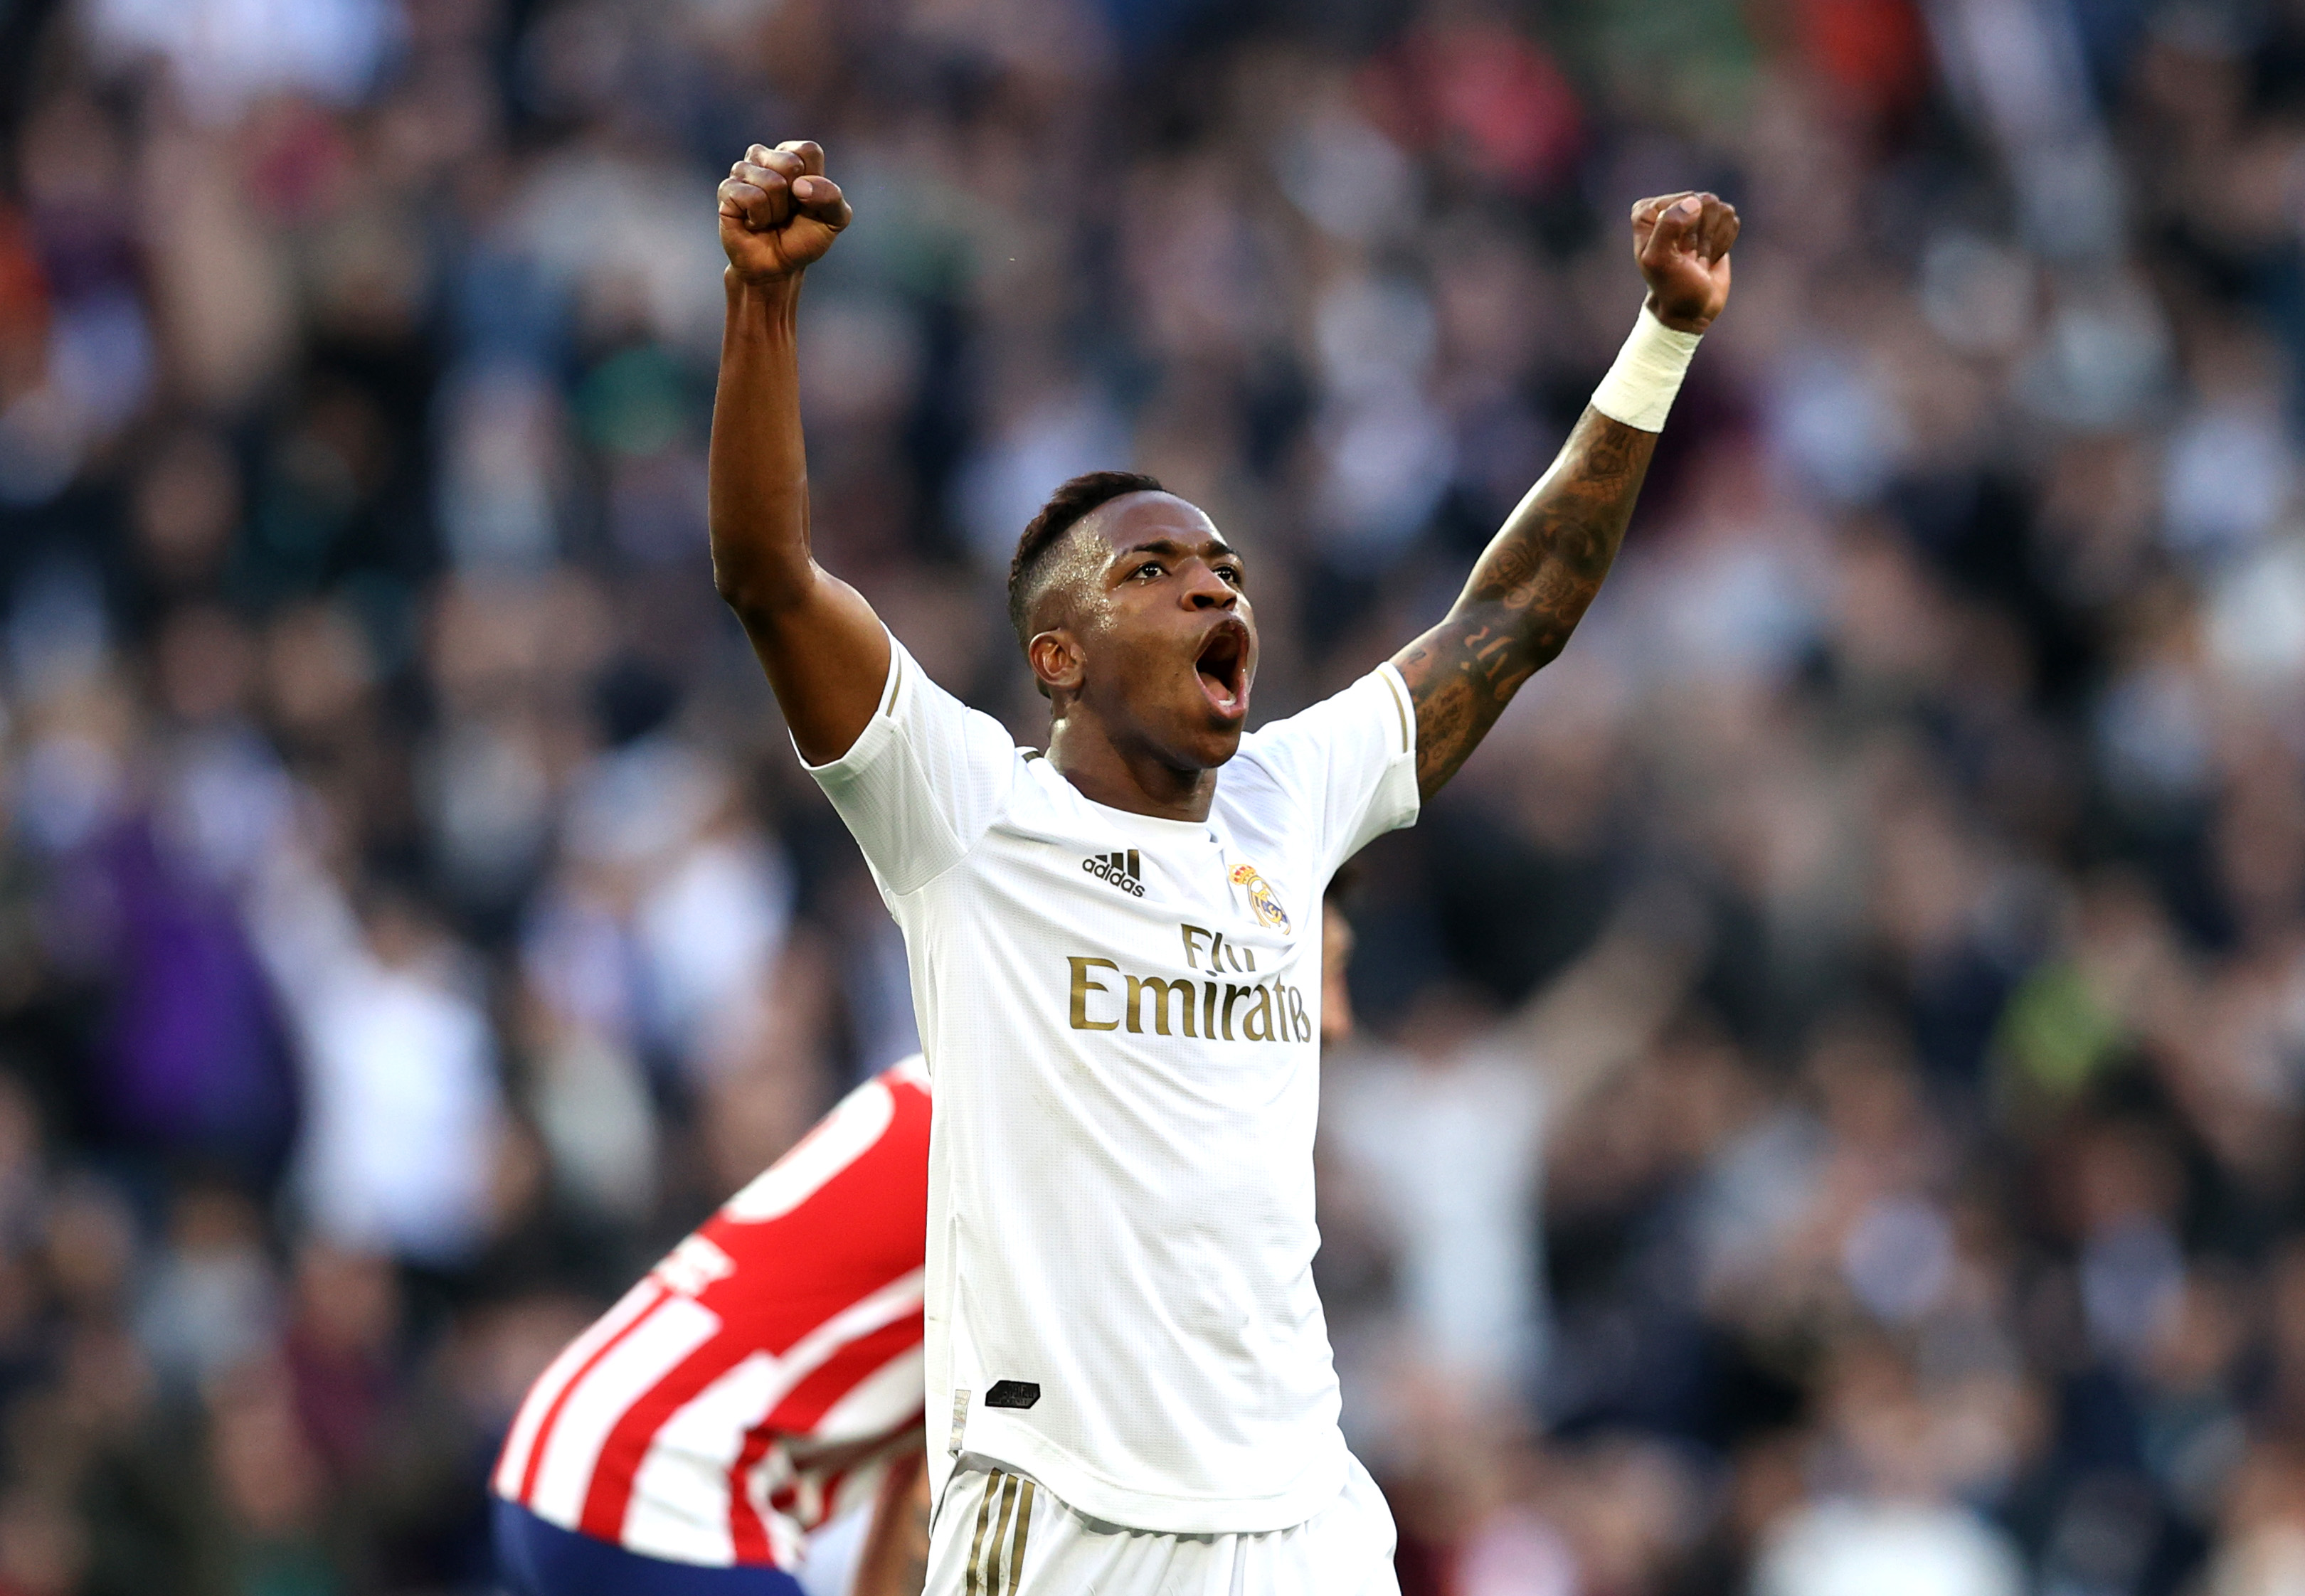 MADRID, SPAIN - FEBRUARY 01: Vinicius Junior of Real Madrid celebrates victory after the La Liga match between Real Madrid CF and Club Atletico de Madrid at Estadio Santiago Bernabeu on February 01, 2020 in Madrid, Spain. (Photo by Angel Martinez/Getty Images)